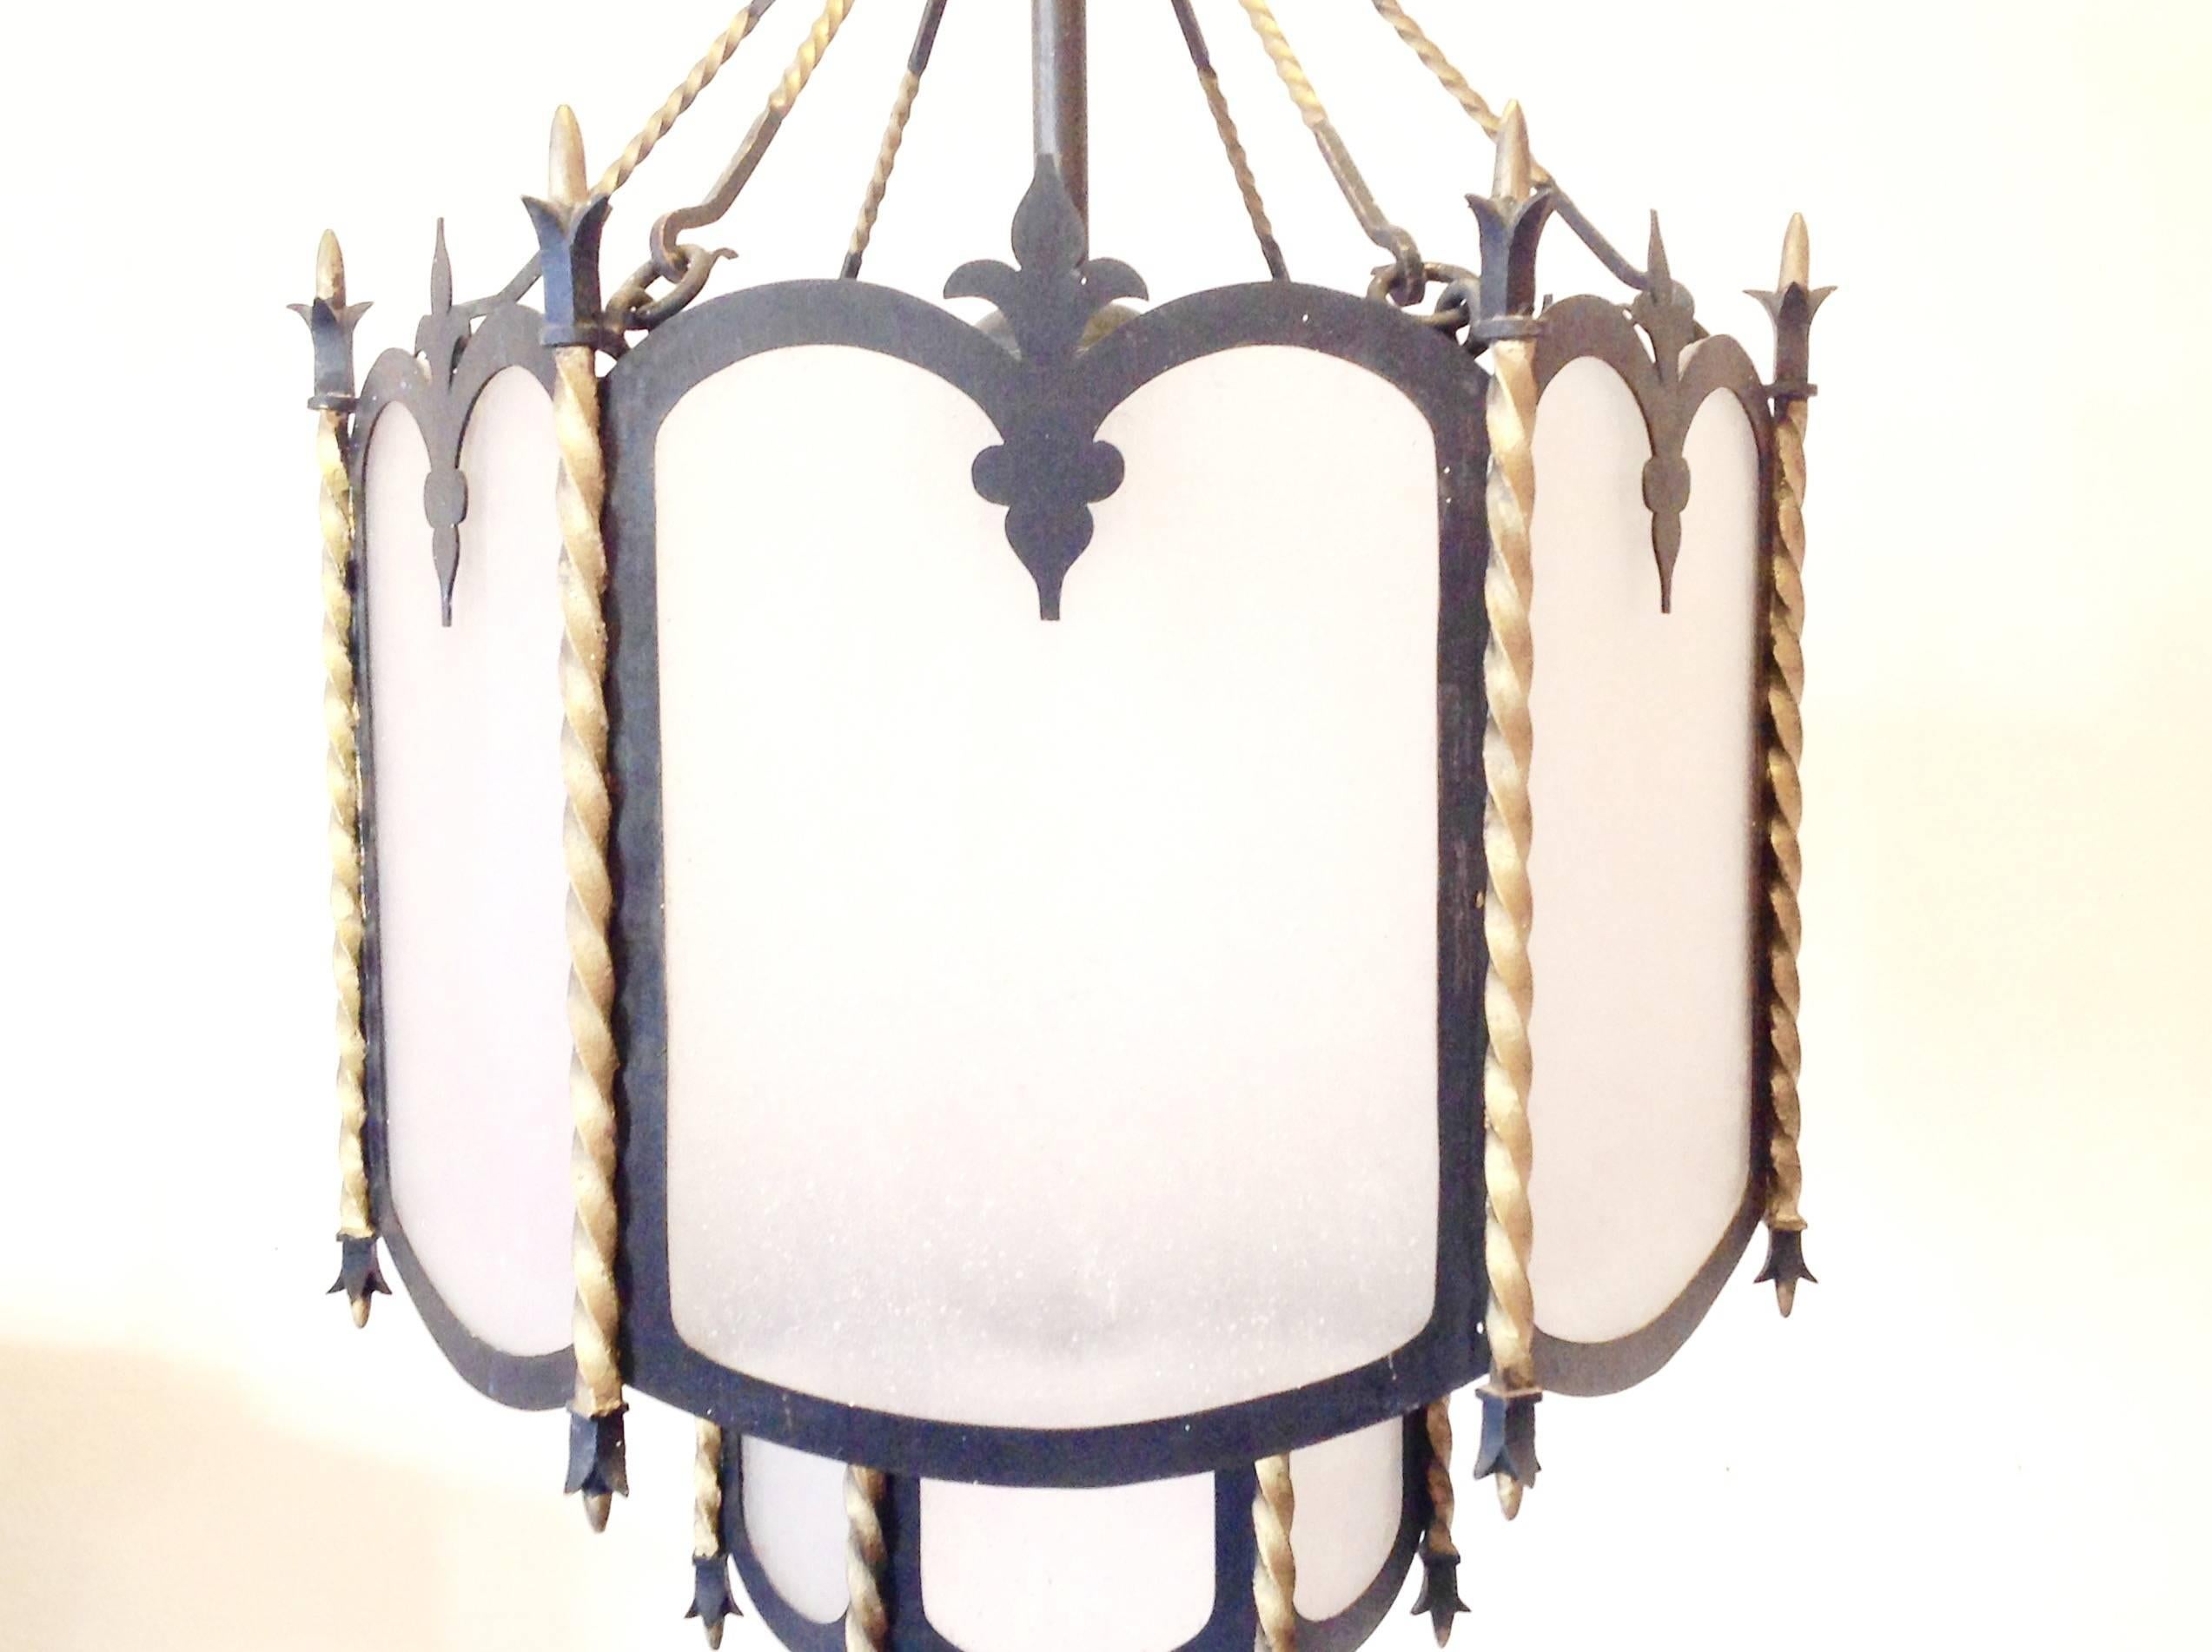 Antique six-light iron lantern with frosted glass with quatrefoil design. Can be indoor or out door. Has been fully restored and wired to UL standards.